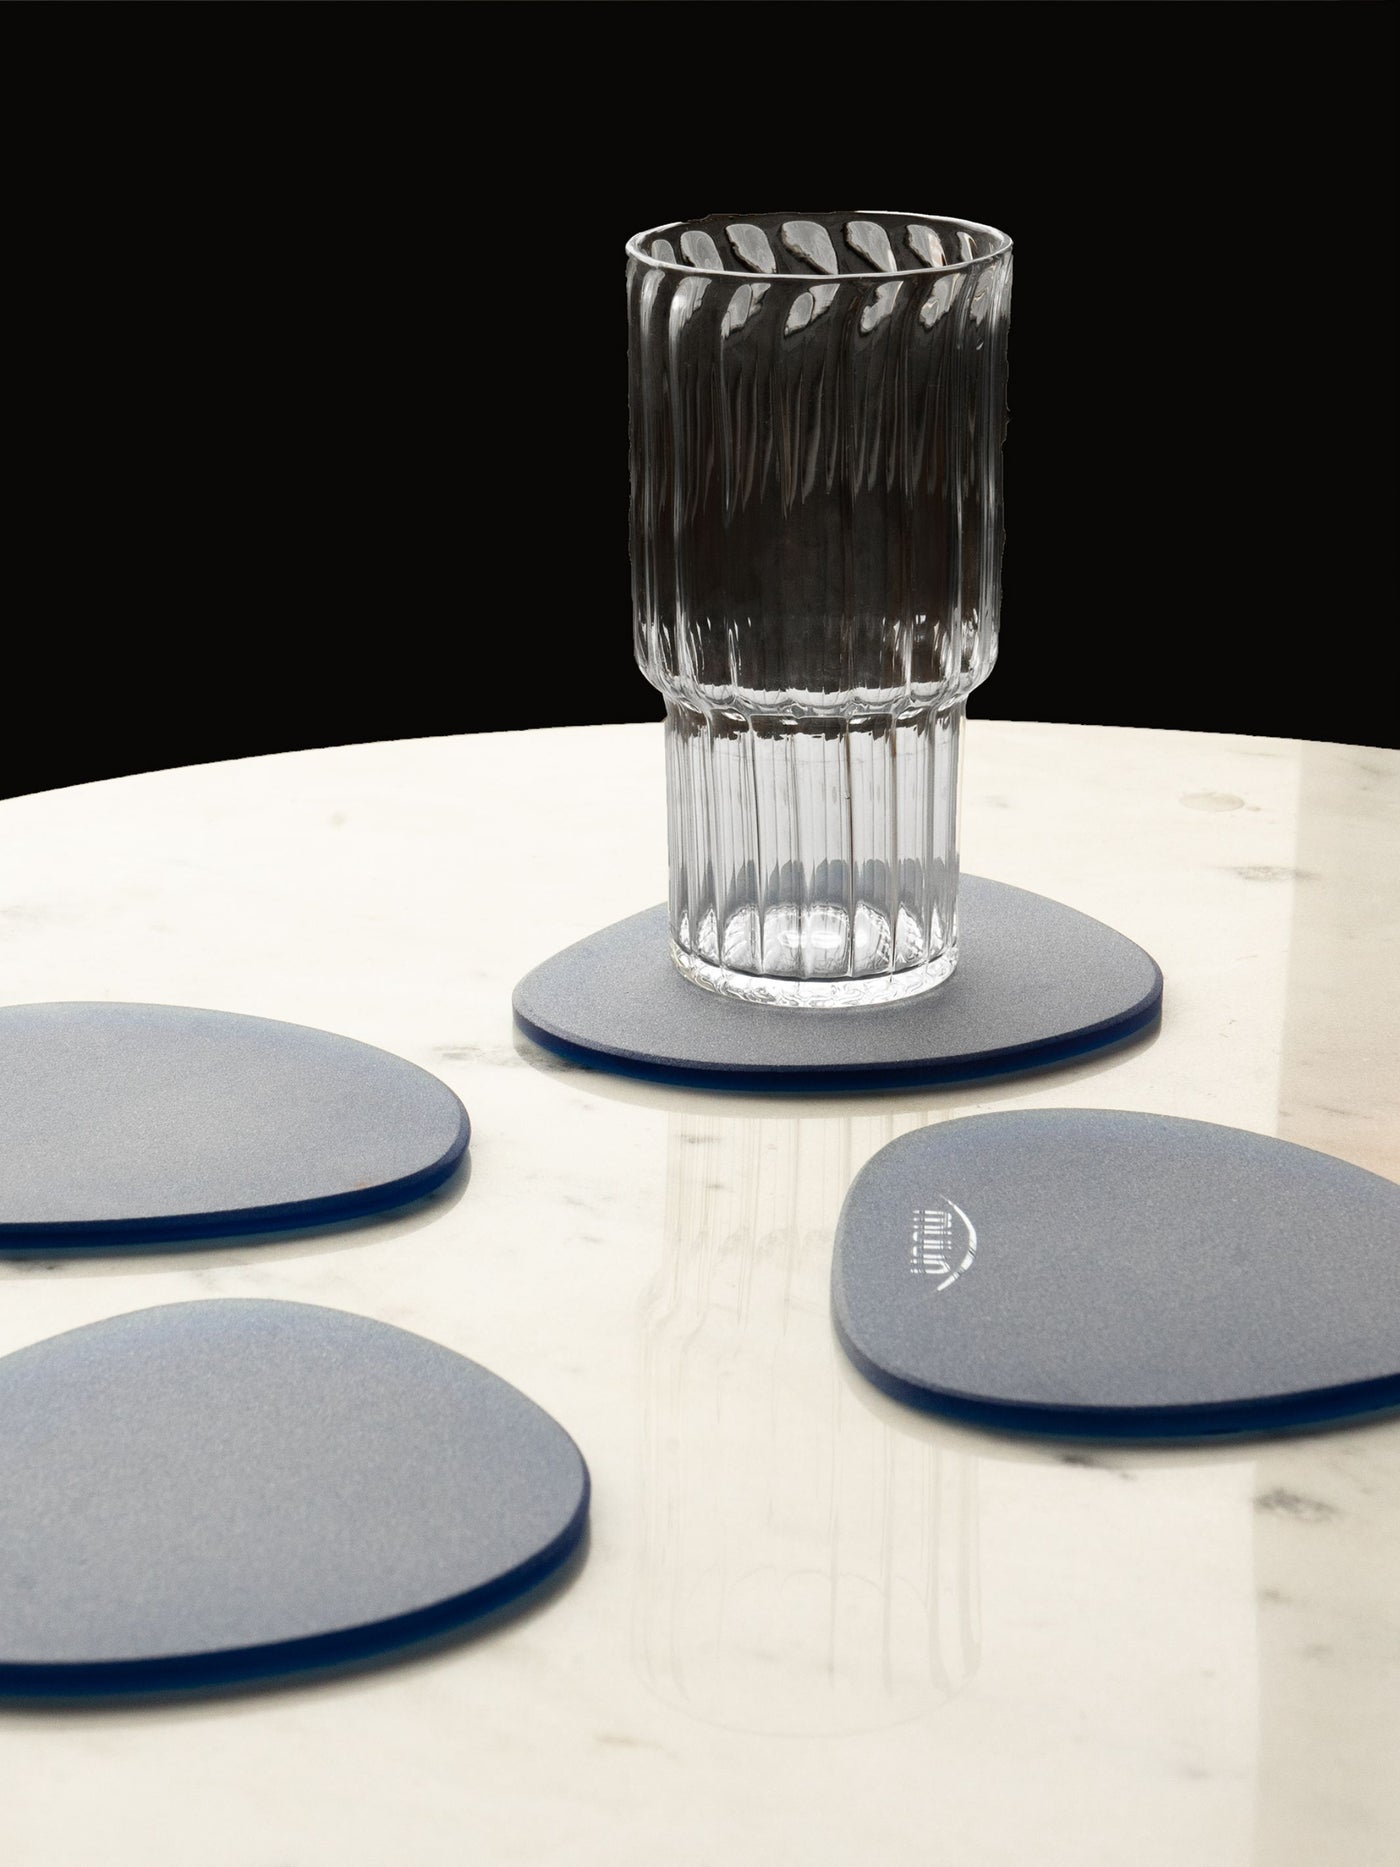 Blue Frosted Glass Coasters Set of 4